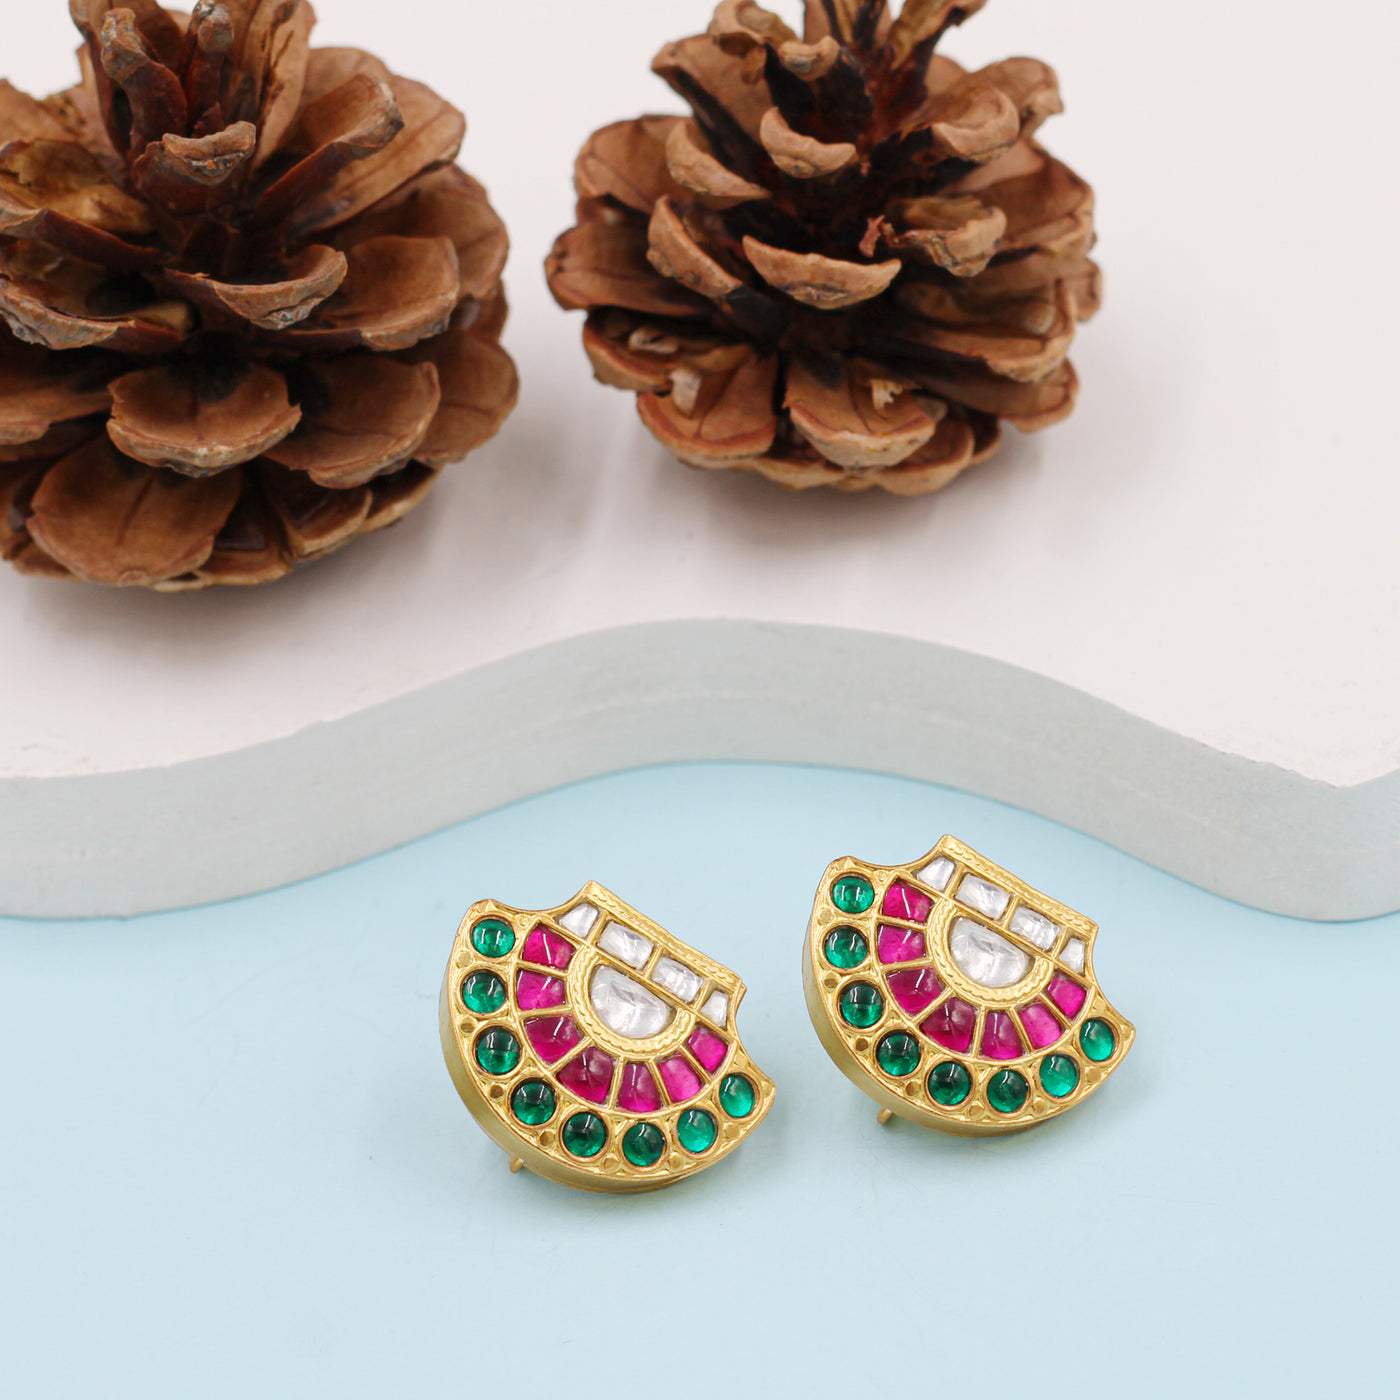 Designer Earrings in Silver, Gleaming with 24K Gold Plating Studded with  Kundan Setting